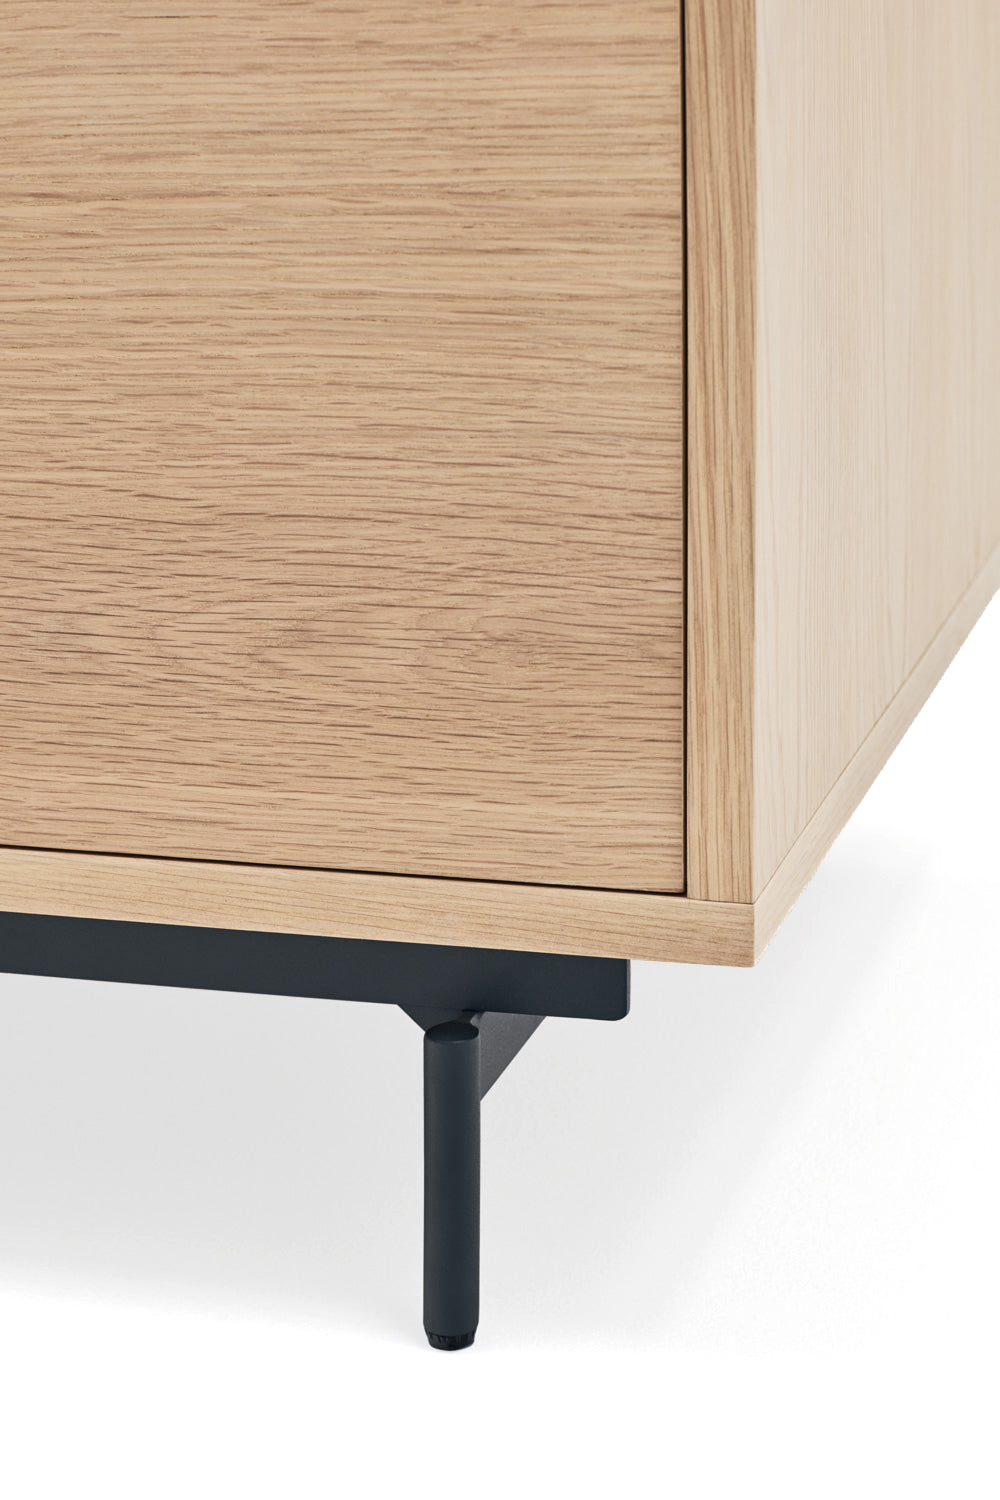 VALLEY chest of drawers natural oak with dark finish